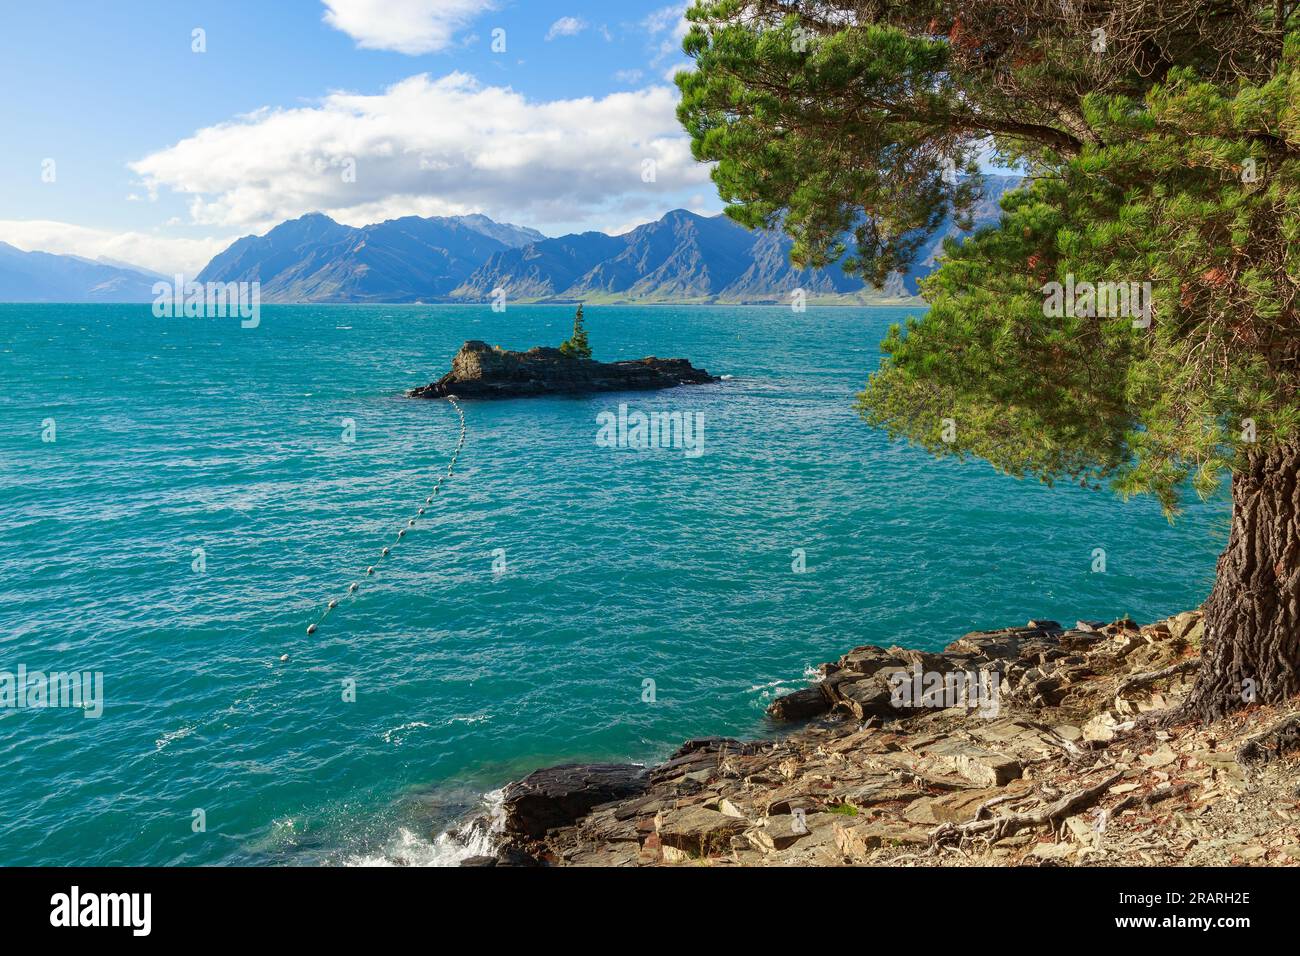 Lake Hawea in the Otago district of New Zealand's South Island. The booms leading to the tiny island protect the lake's dam from logs and debris. Stock Photo